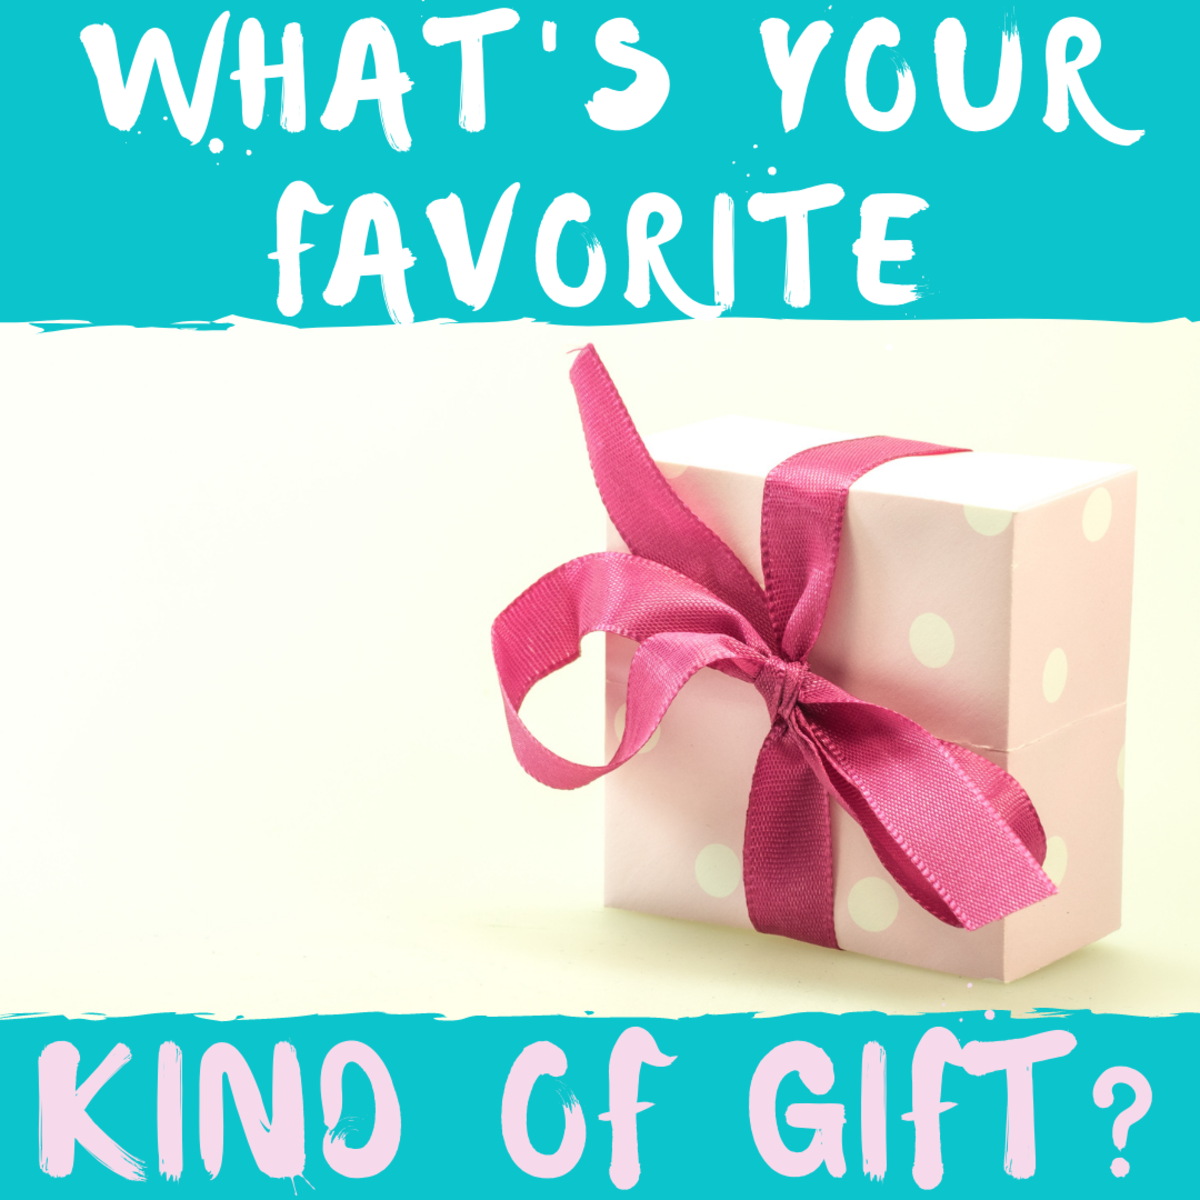 Is there a certain type of gift you like to receive?